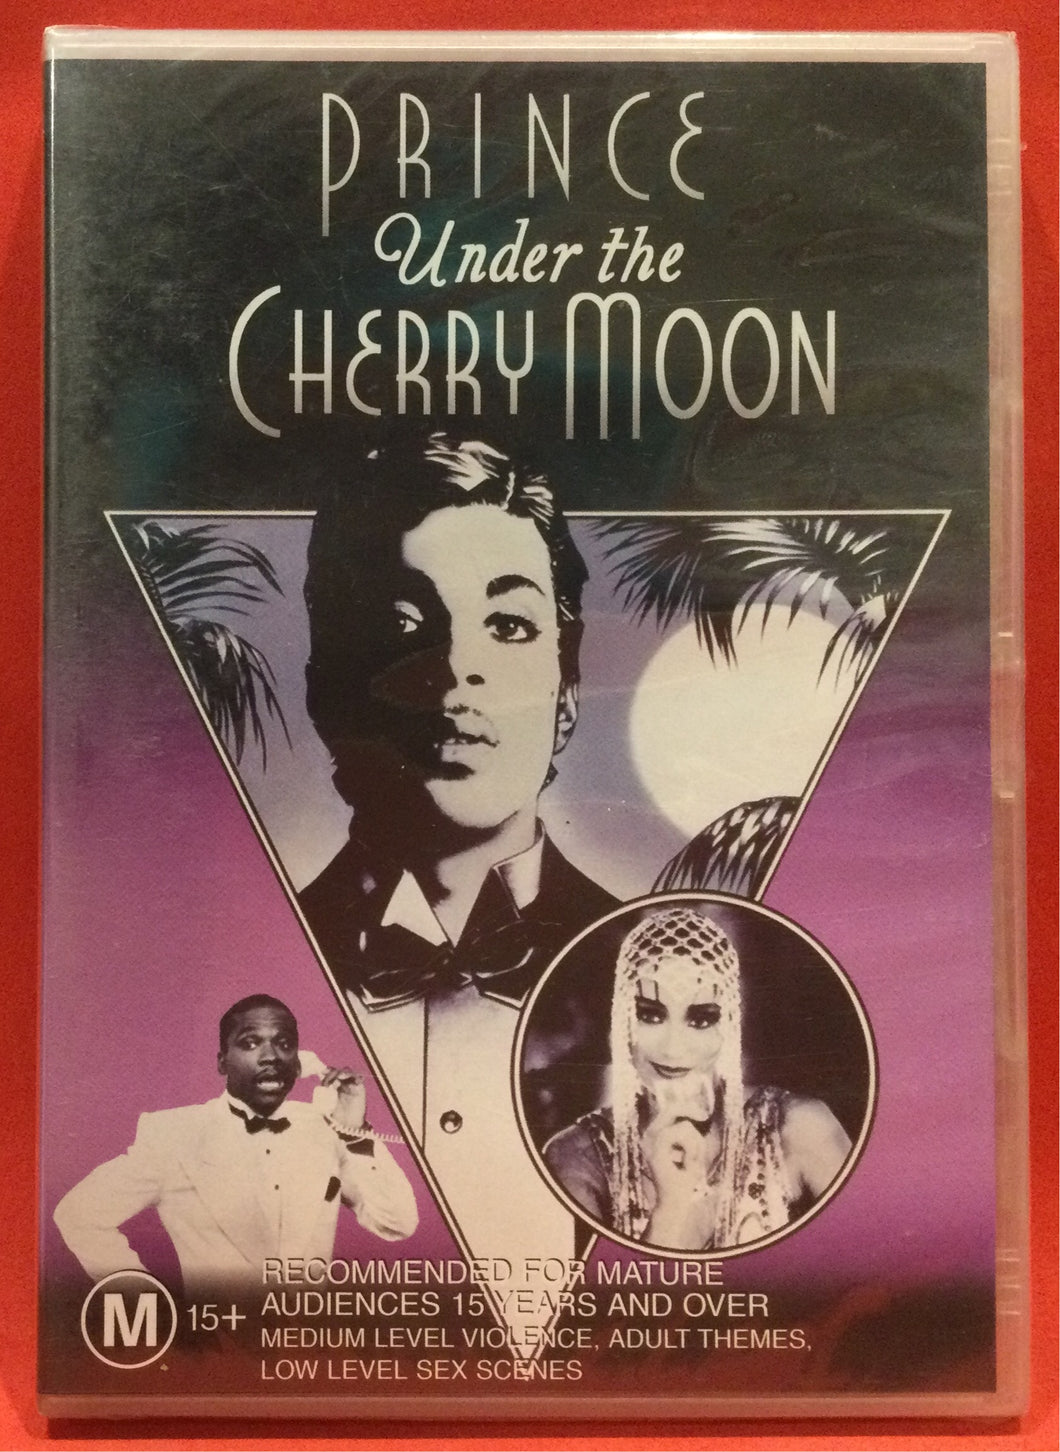 PRINCE - UNDER THE CHERRY MOON - DVD (SEALED)